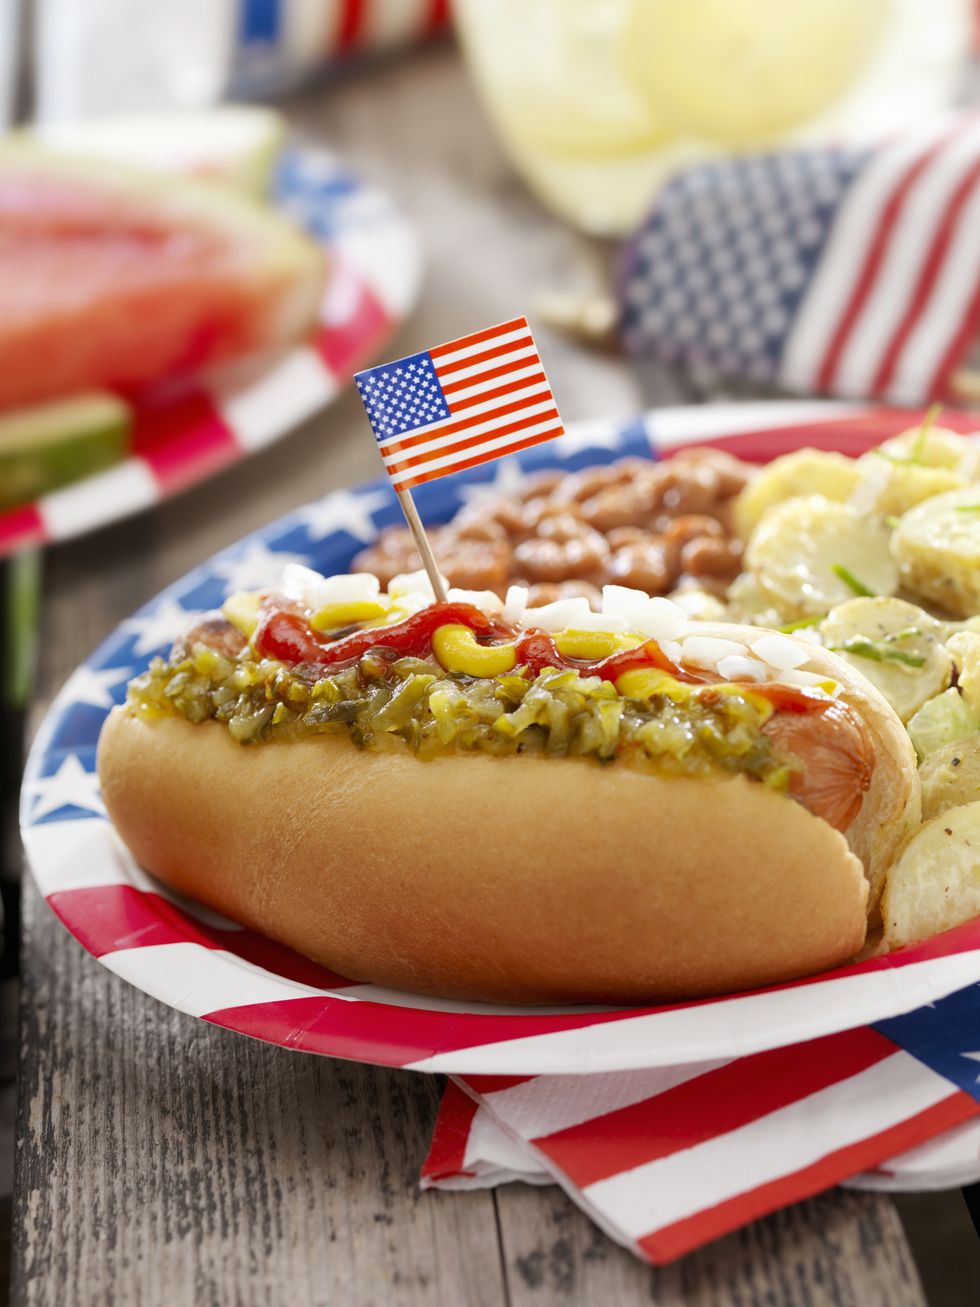 bbq hotdog with mustard, ketchup, relish and onions with potato salad and baked beans at a 4th of july picnic  photographed on hasselblad h3d2 39mb camera